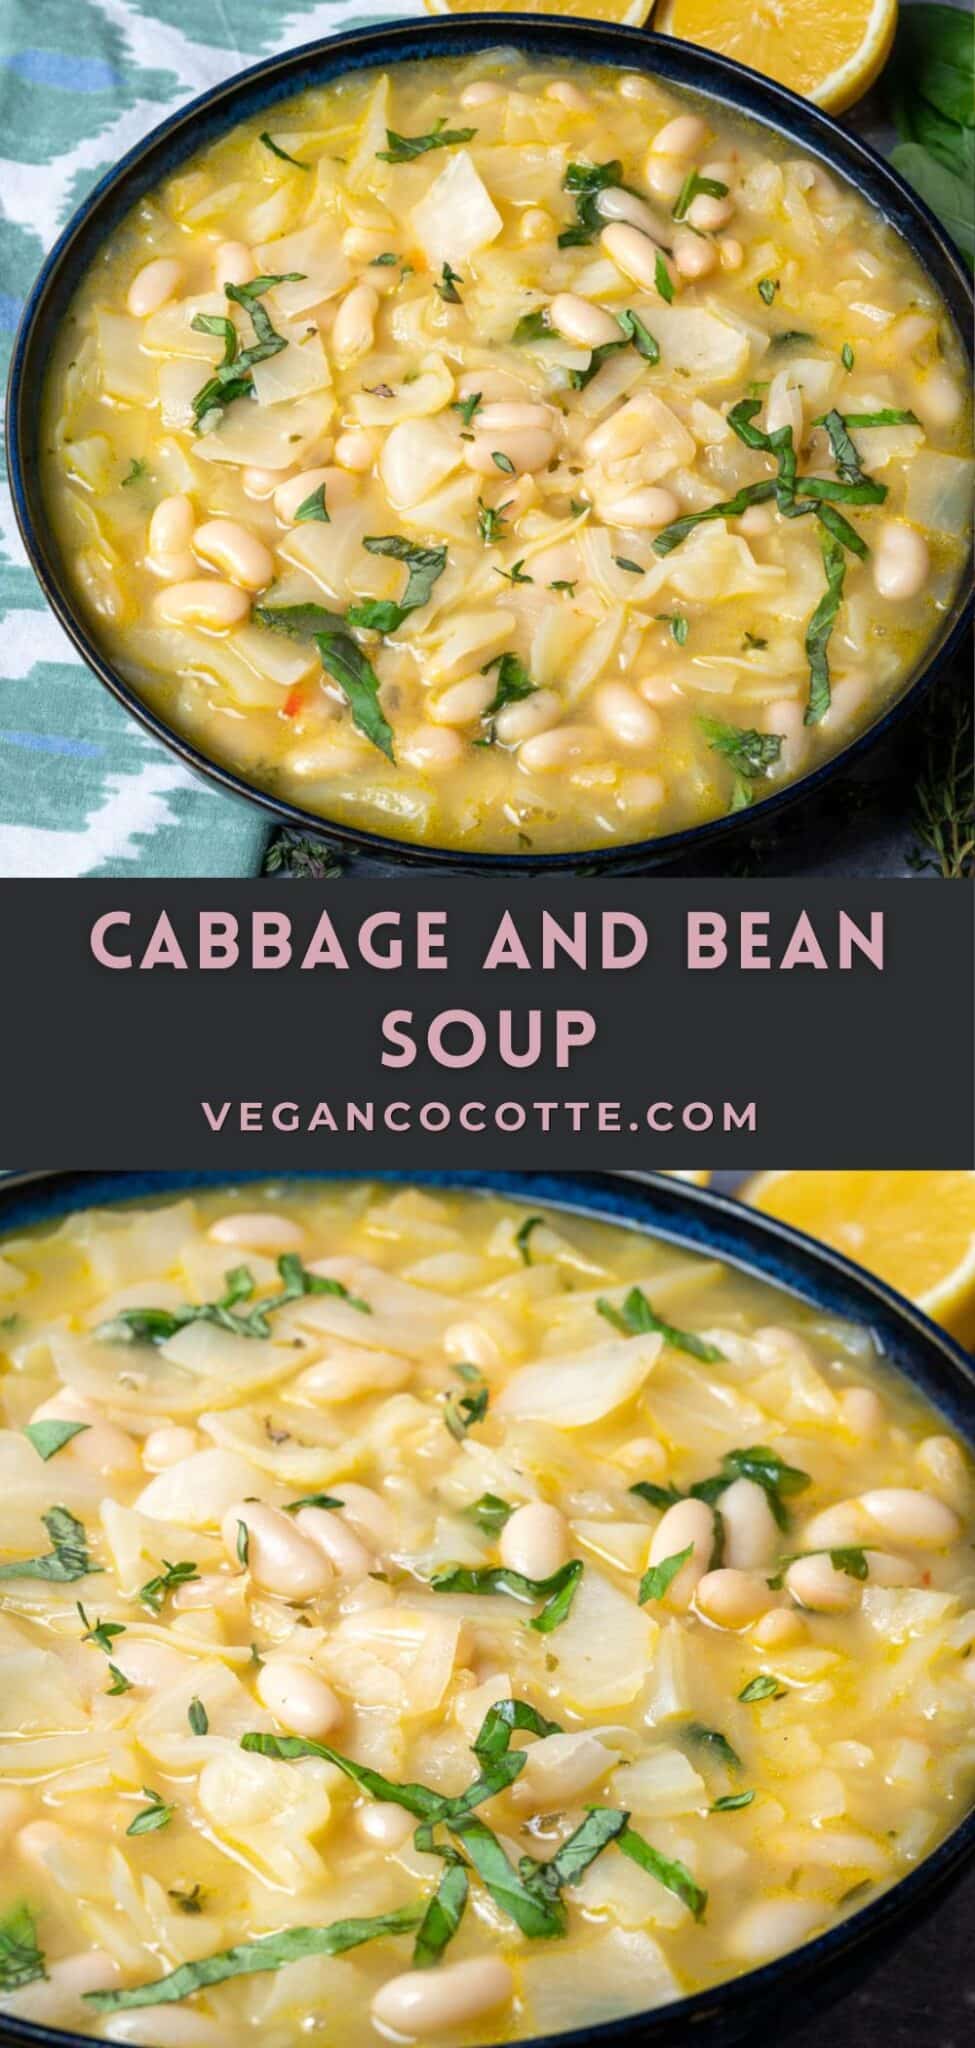 Cabbage and Bean Soup - Vegan Cocotte